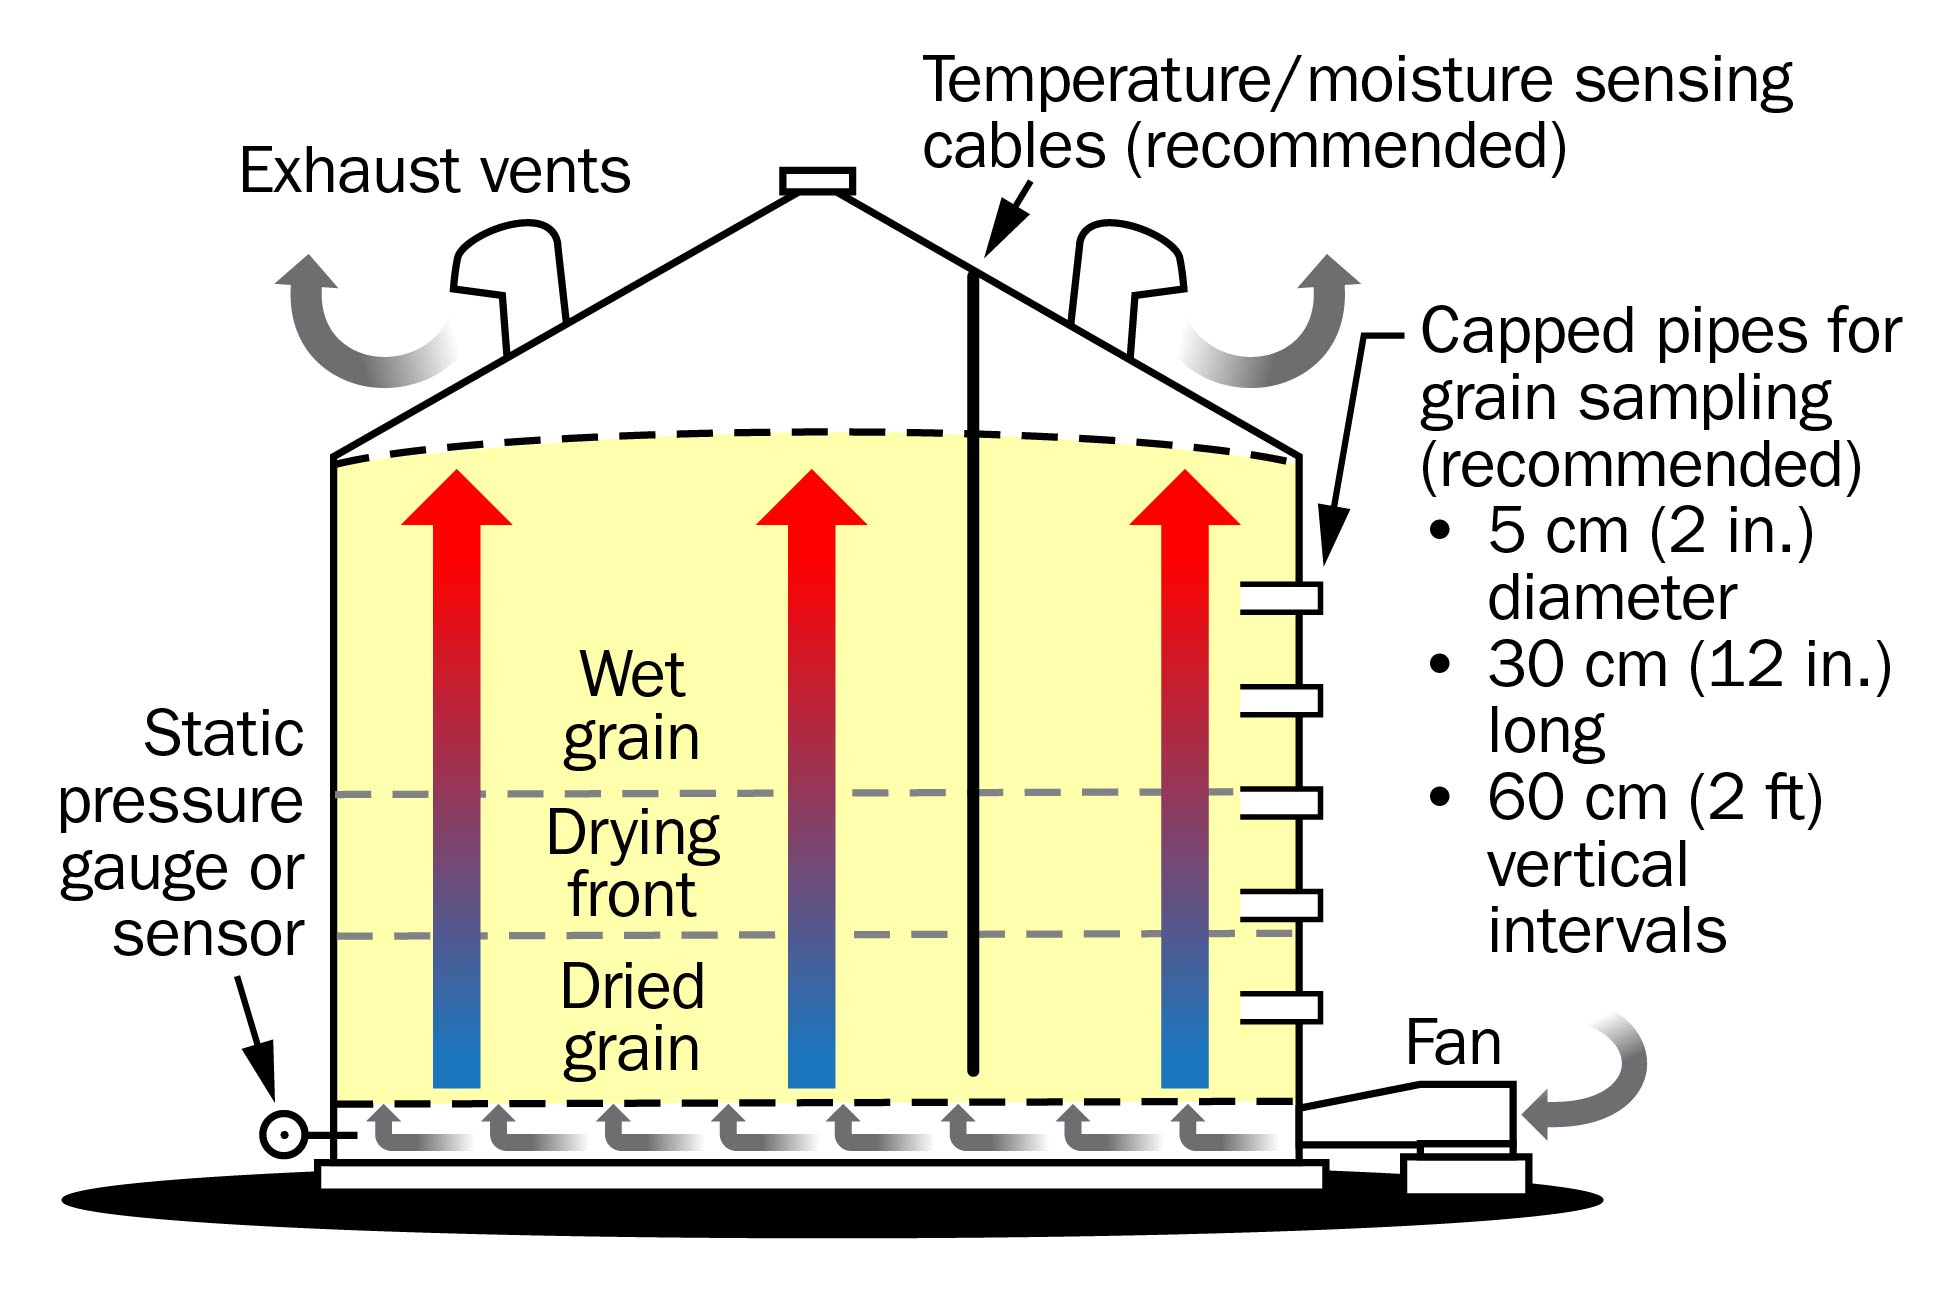 This drawing shows grain in a bin as it is being dried. Key components of a drying bin are labeled. Drying takes place in a “front” or layer which moves up through the grain as it dries. Grain below the front is dry and grain above the front is wet.